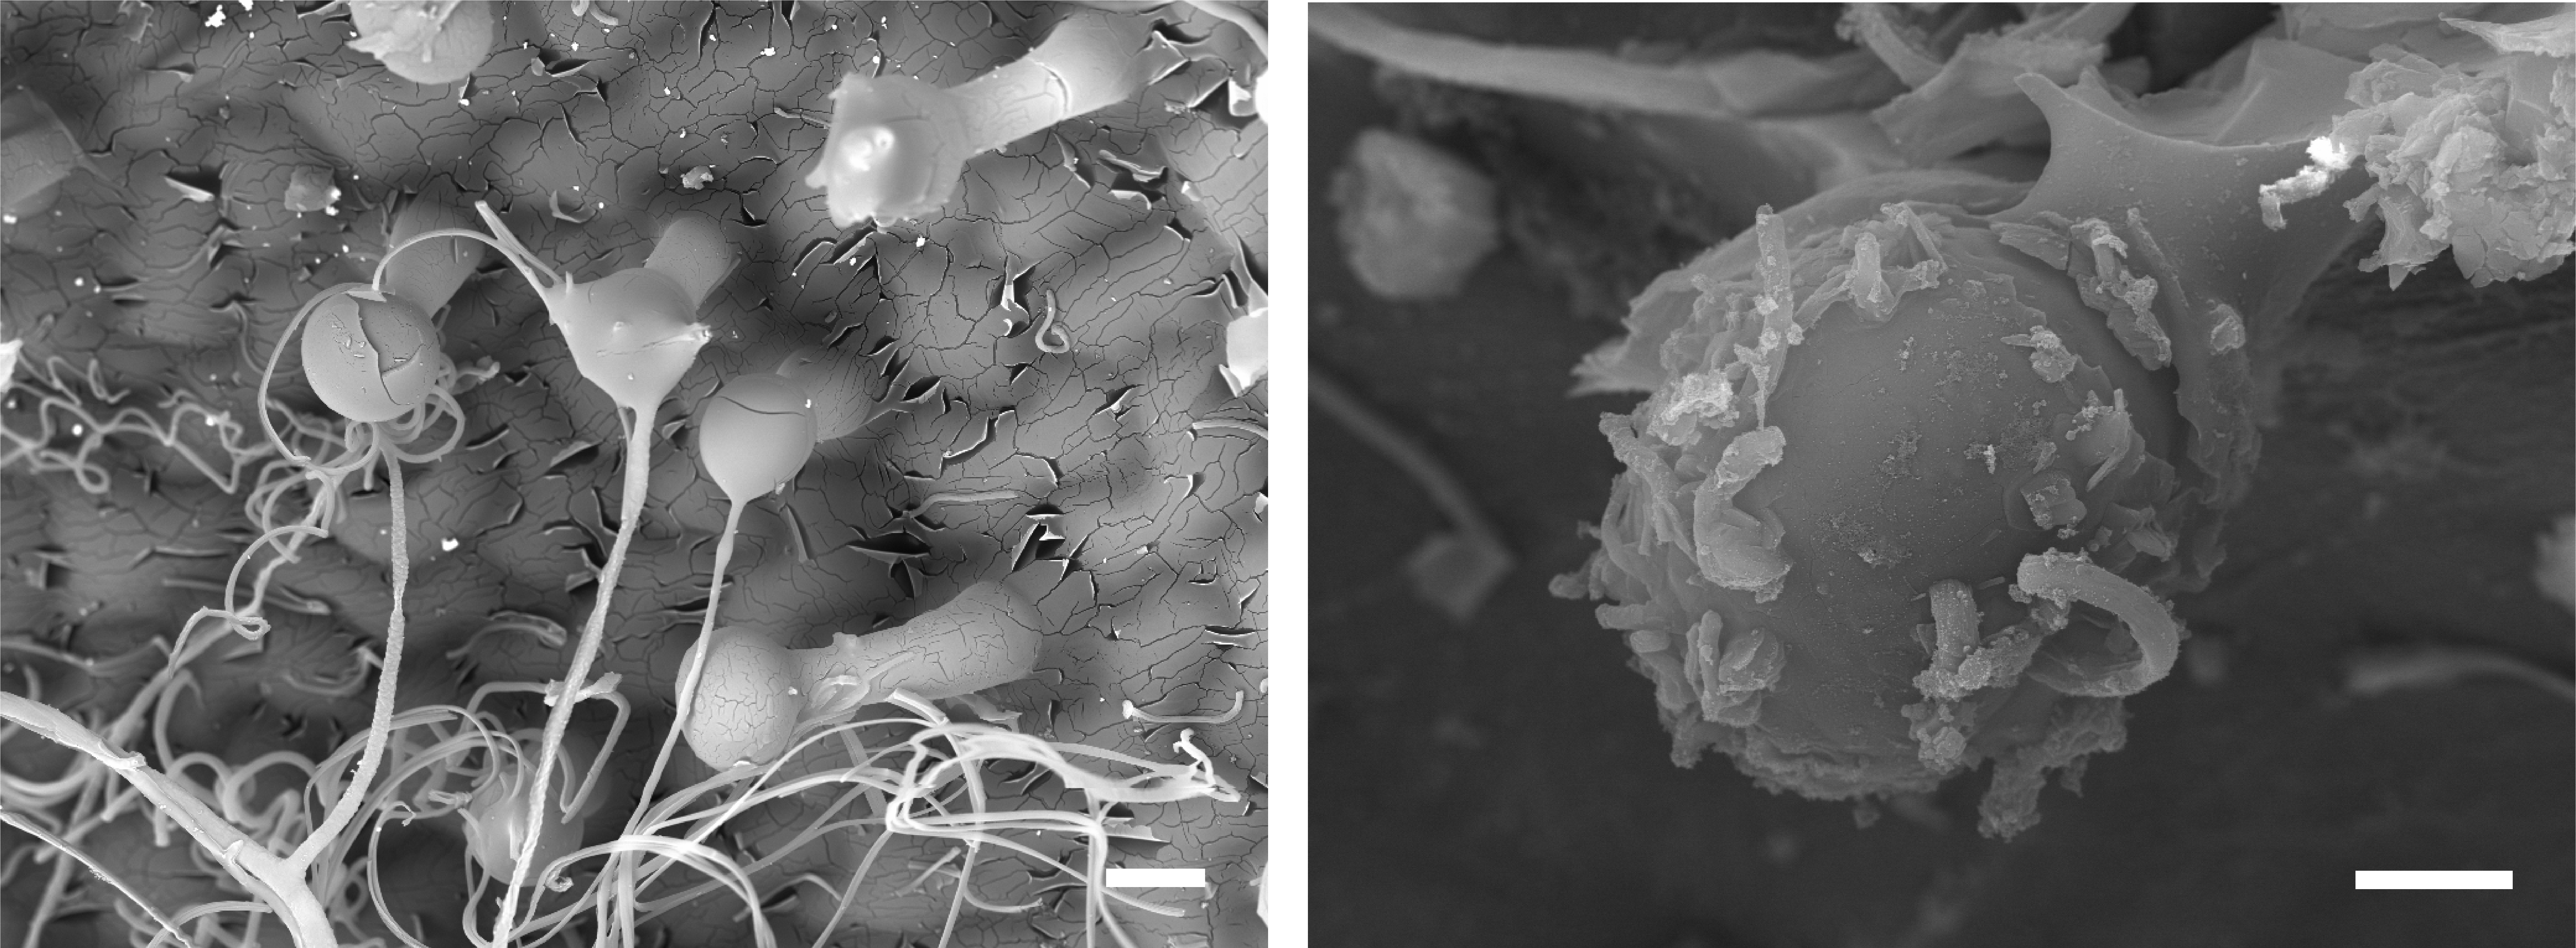 Scanning electron microscopy showing woolly fibres on Dionysia tapetodes emerging from glandular trichomes. Images by Raymond Wightman.